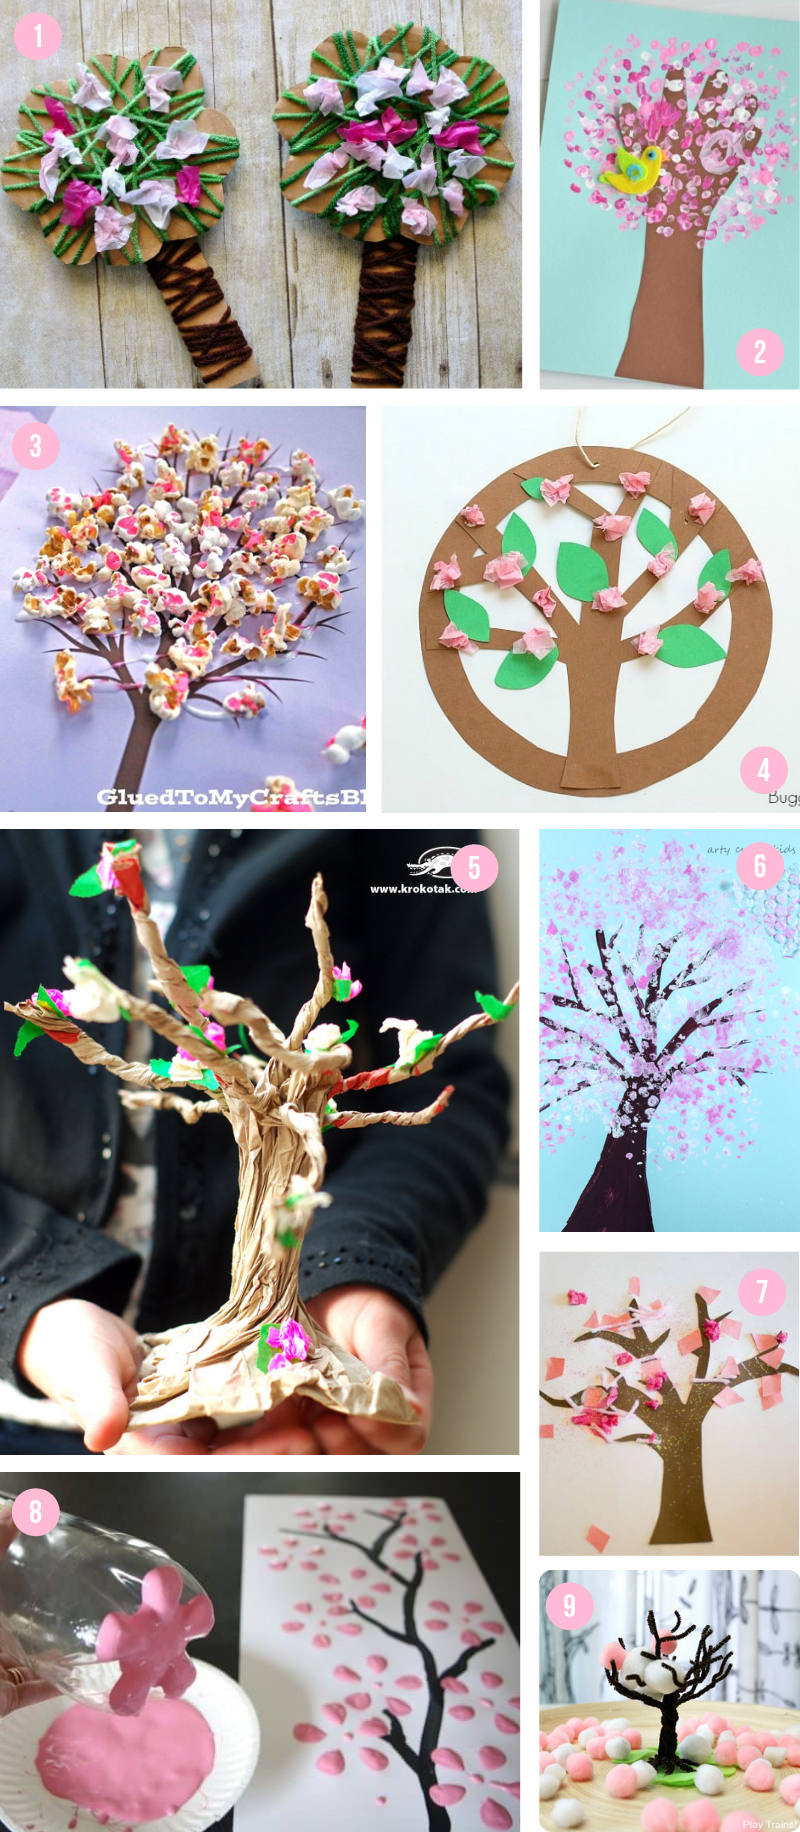 8 Easy Flower Art Craft Projects for Kids